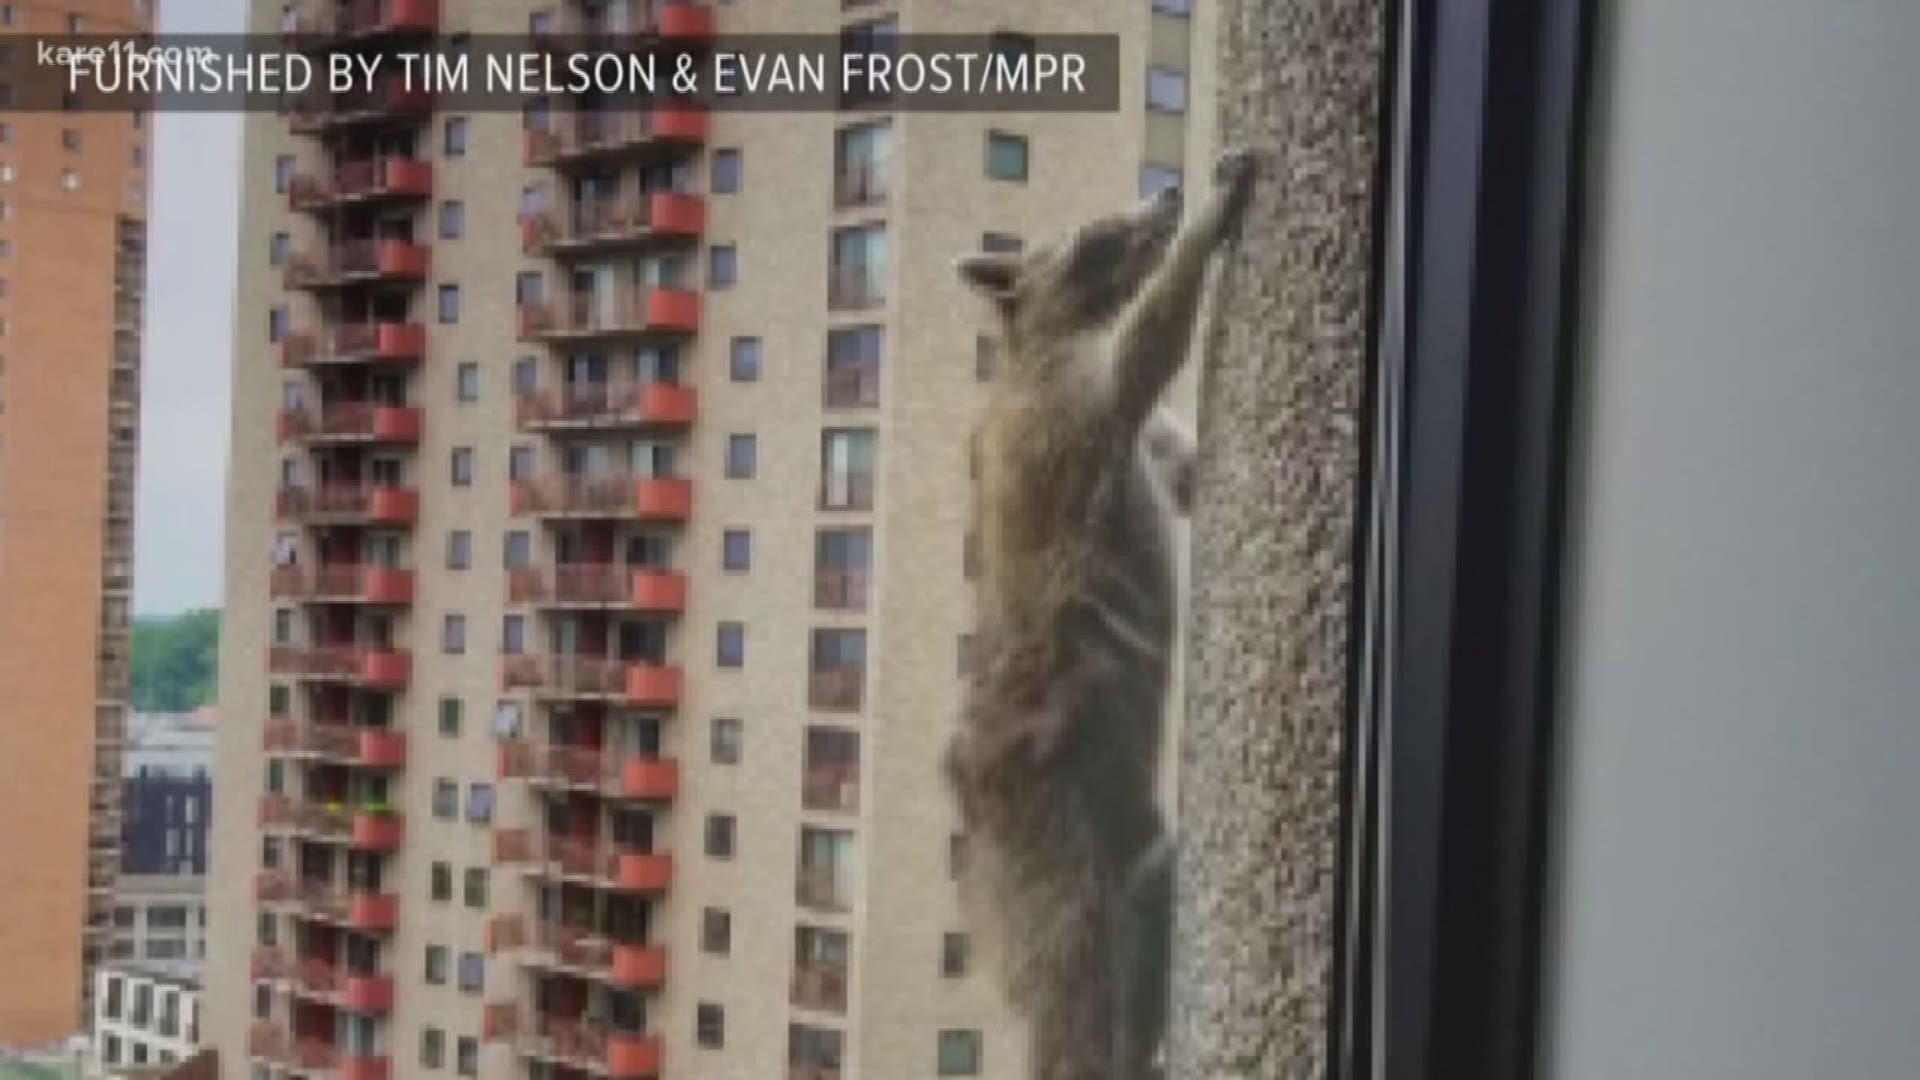 She's back in the wild, and KARE 11's Alicia Lewis has a recap on the MPR raccoon's wild 24 hours in the social media spotlight. https://kare11.tv/2JCgwGg� Subscribe to KARE 11: https://www.youtube.com/subscription_center?add_user=kare11 � Watch more K